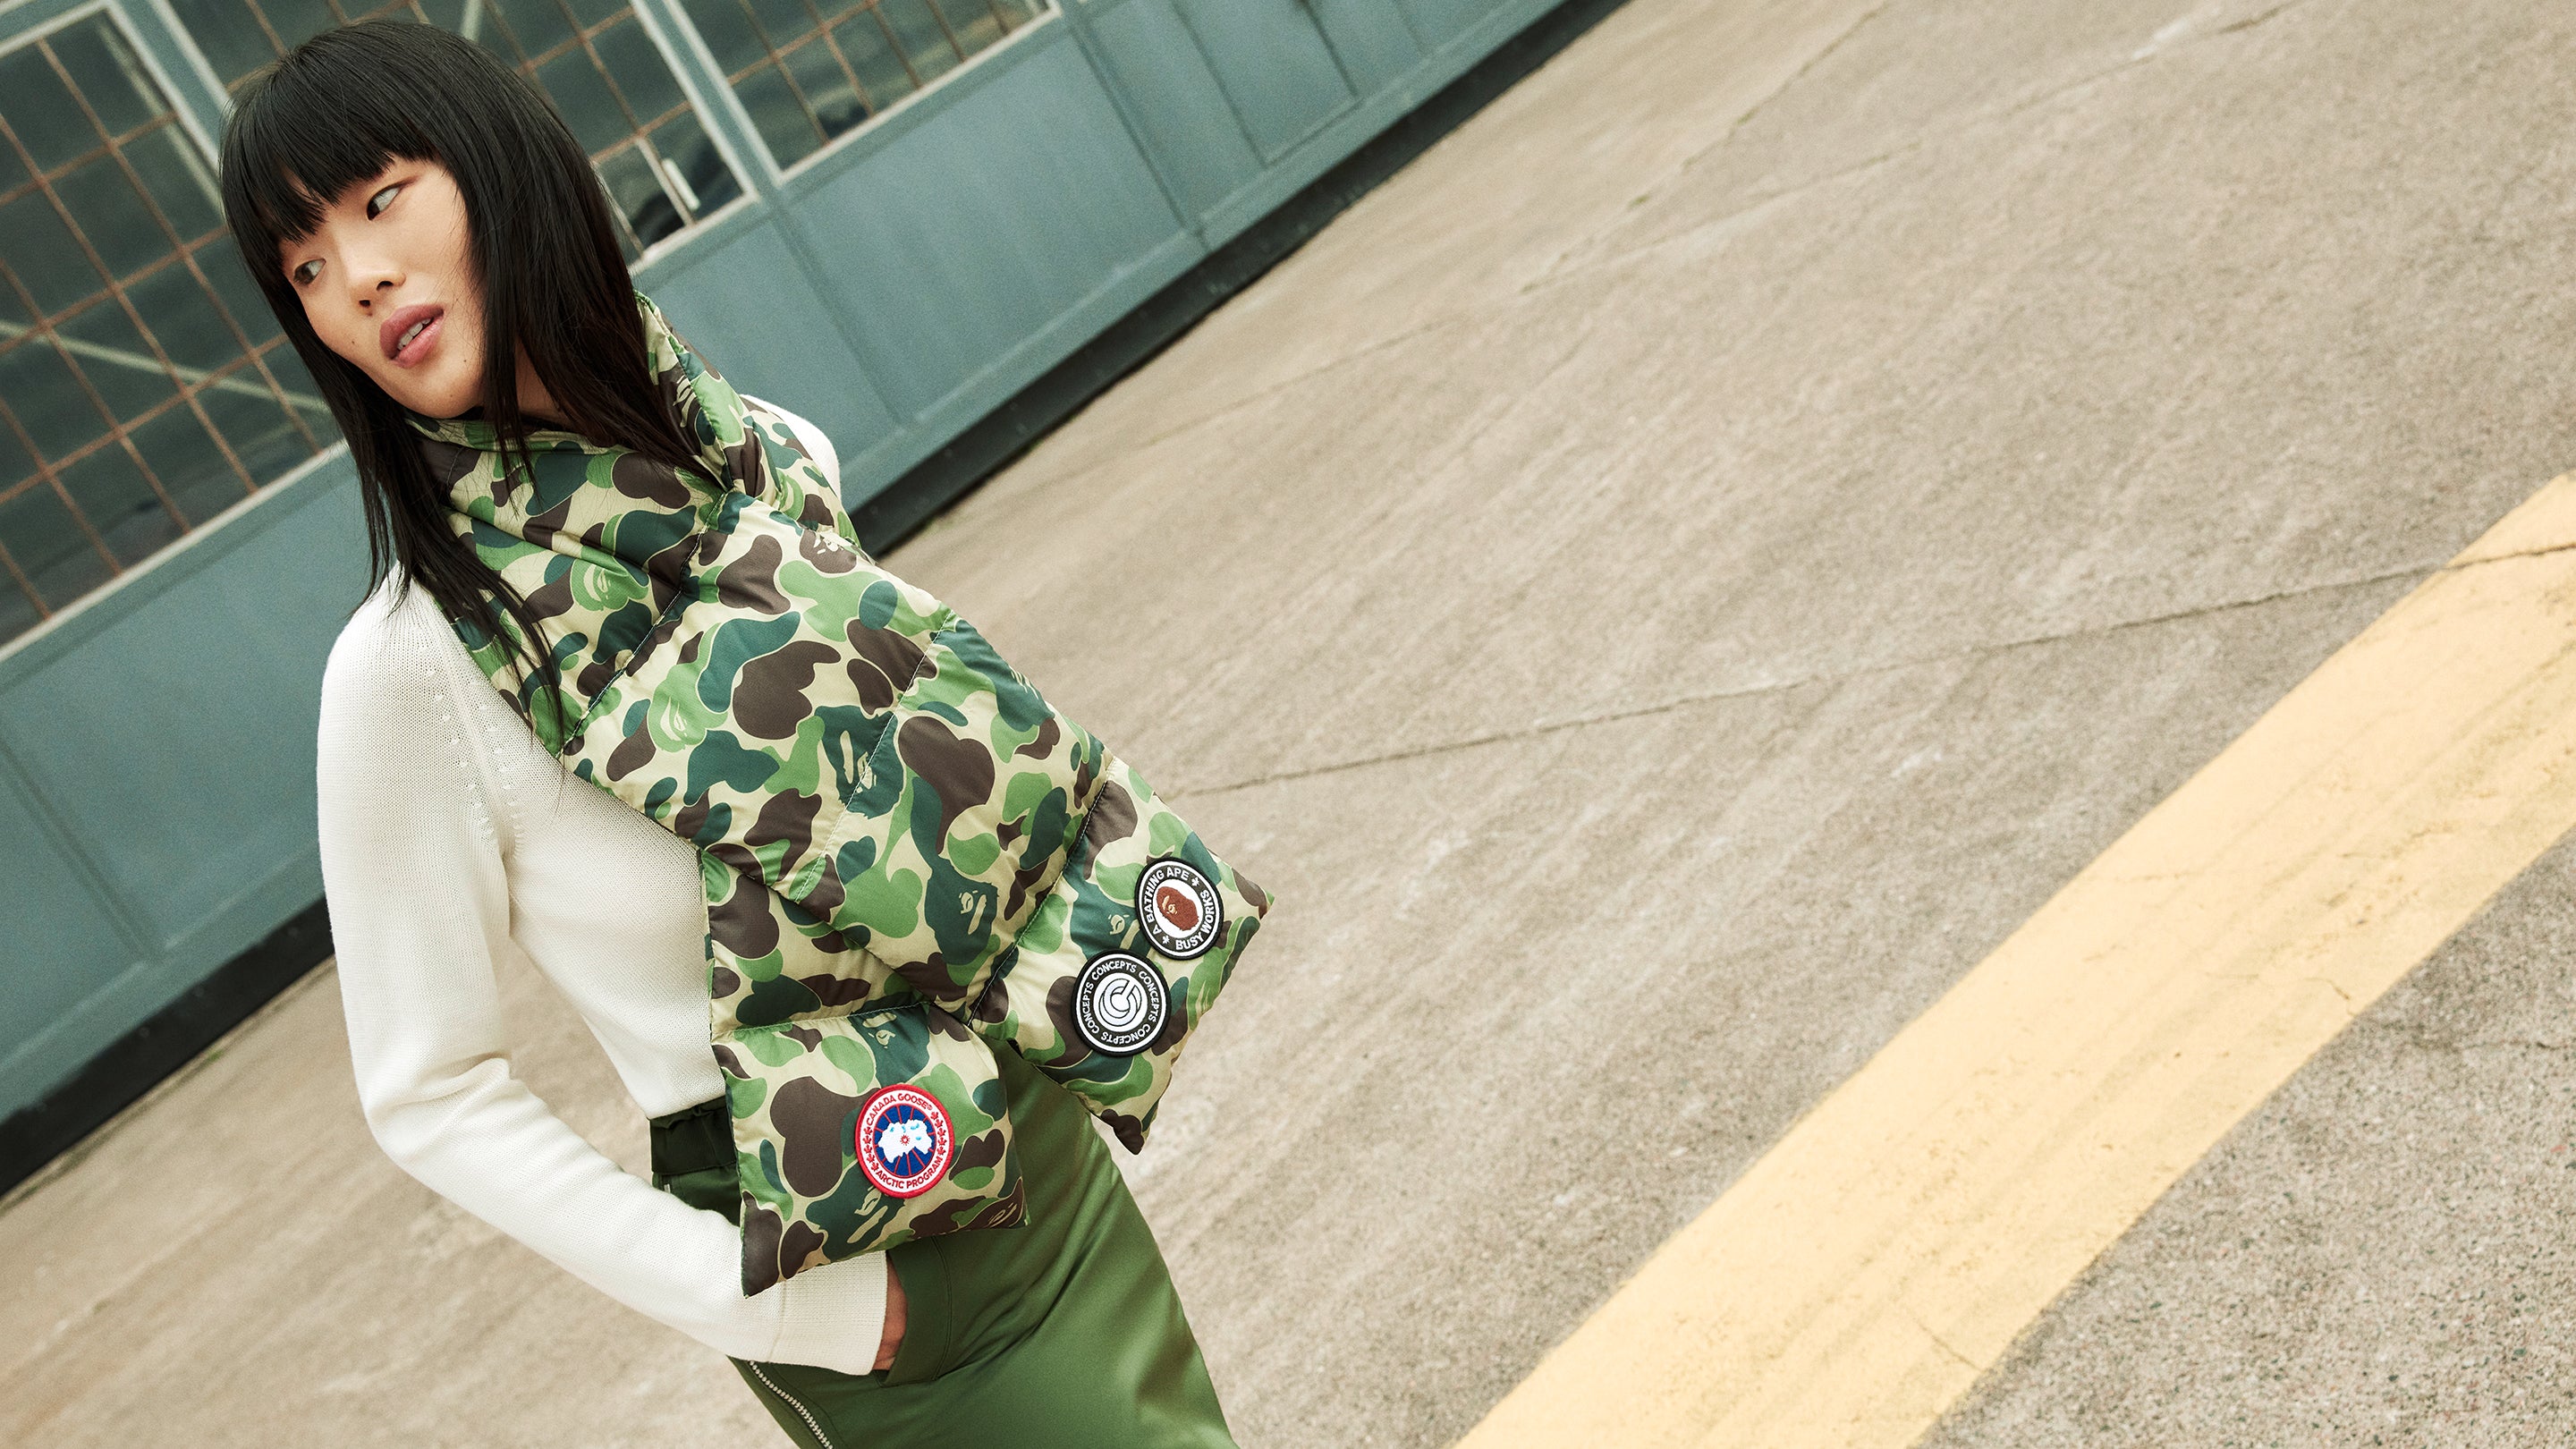 Introducing the Concepts x Canada Goose x Bape Collection